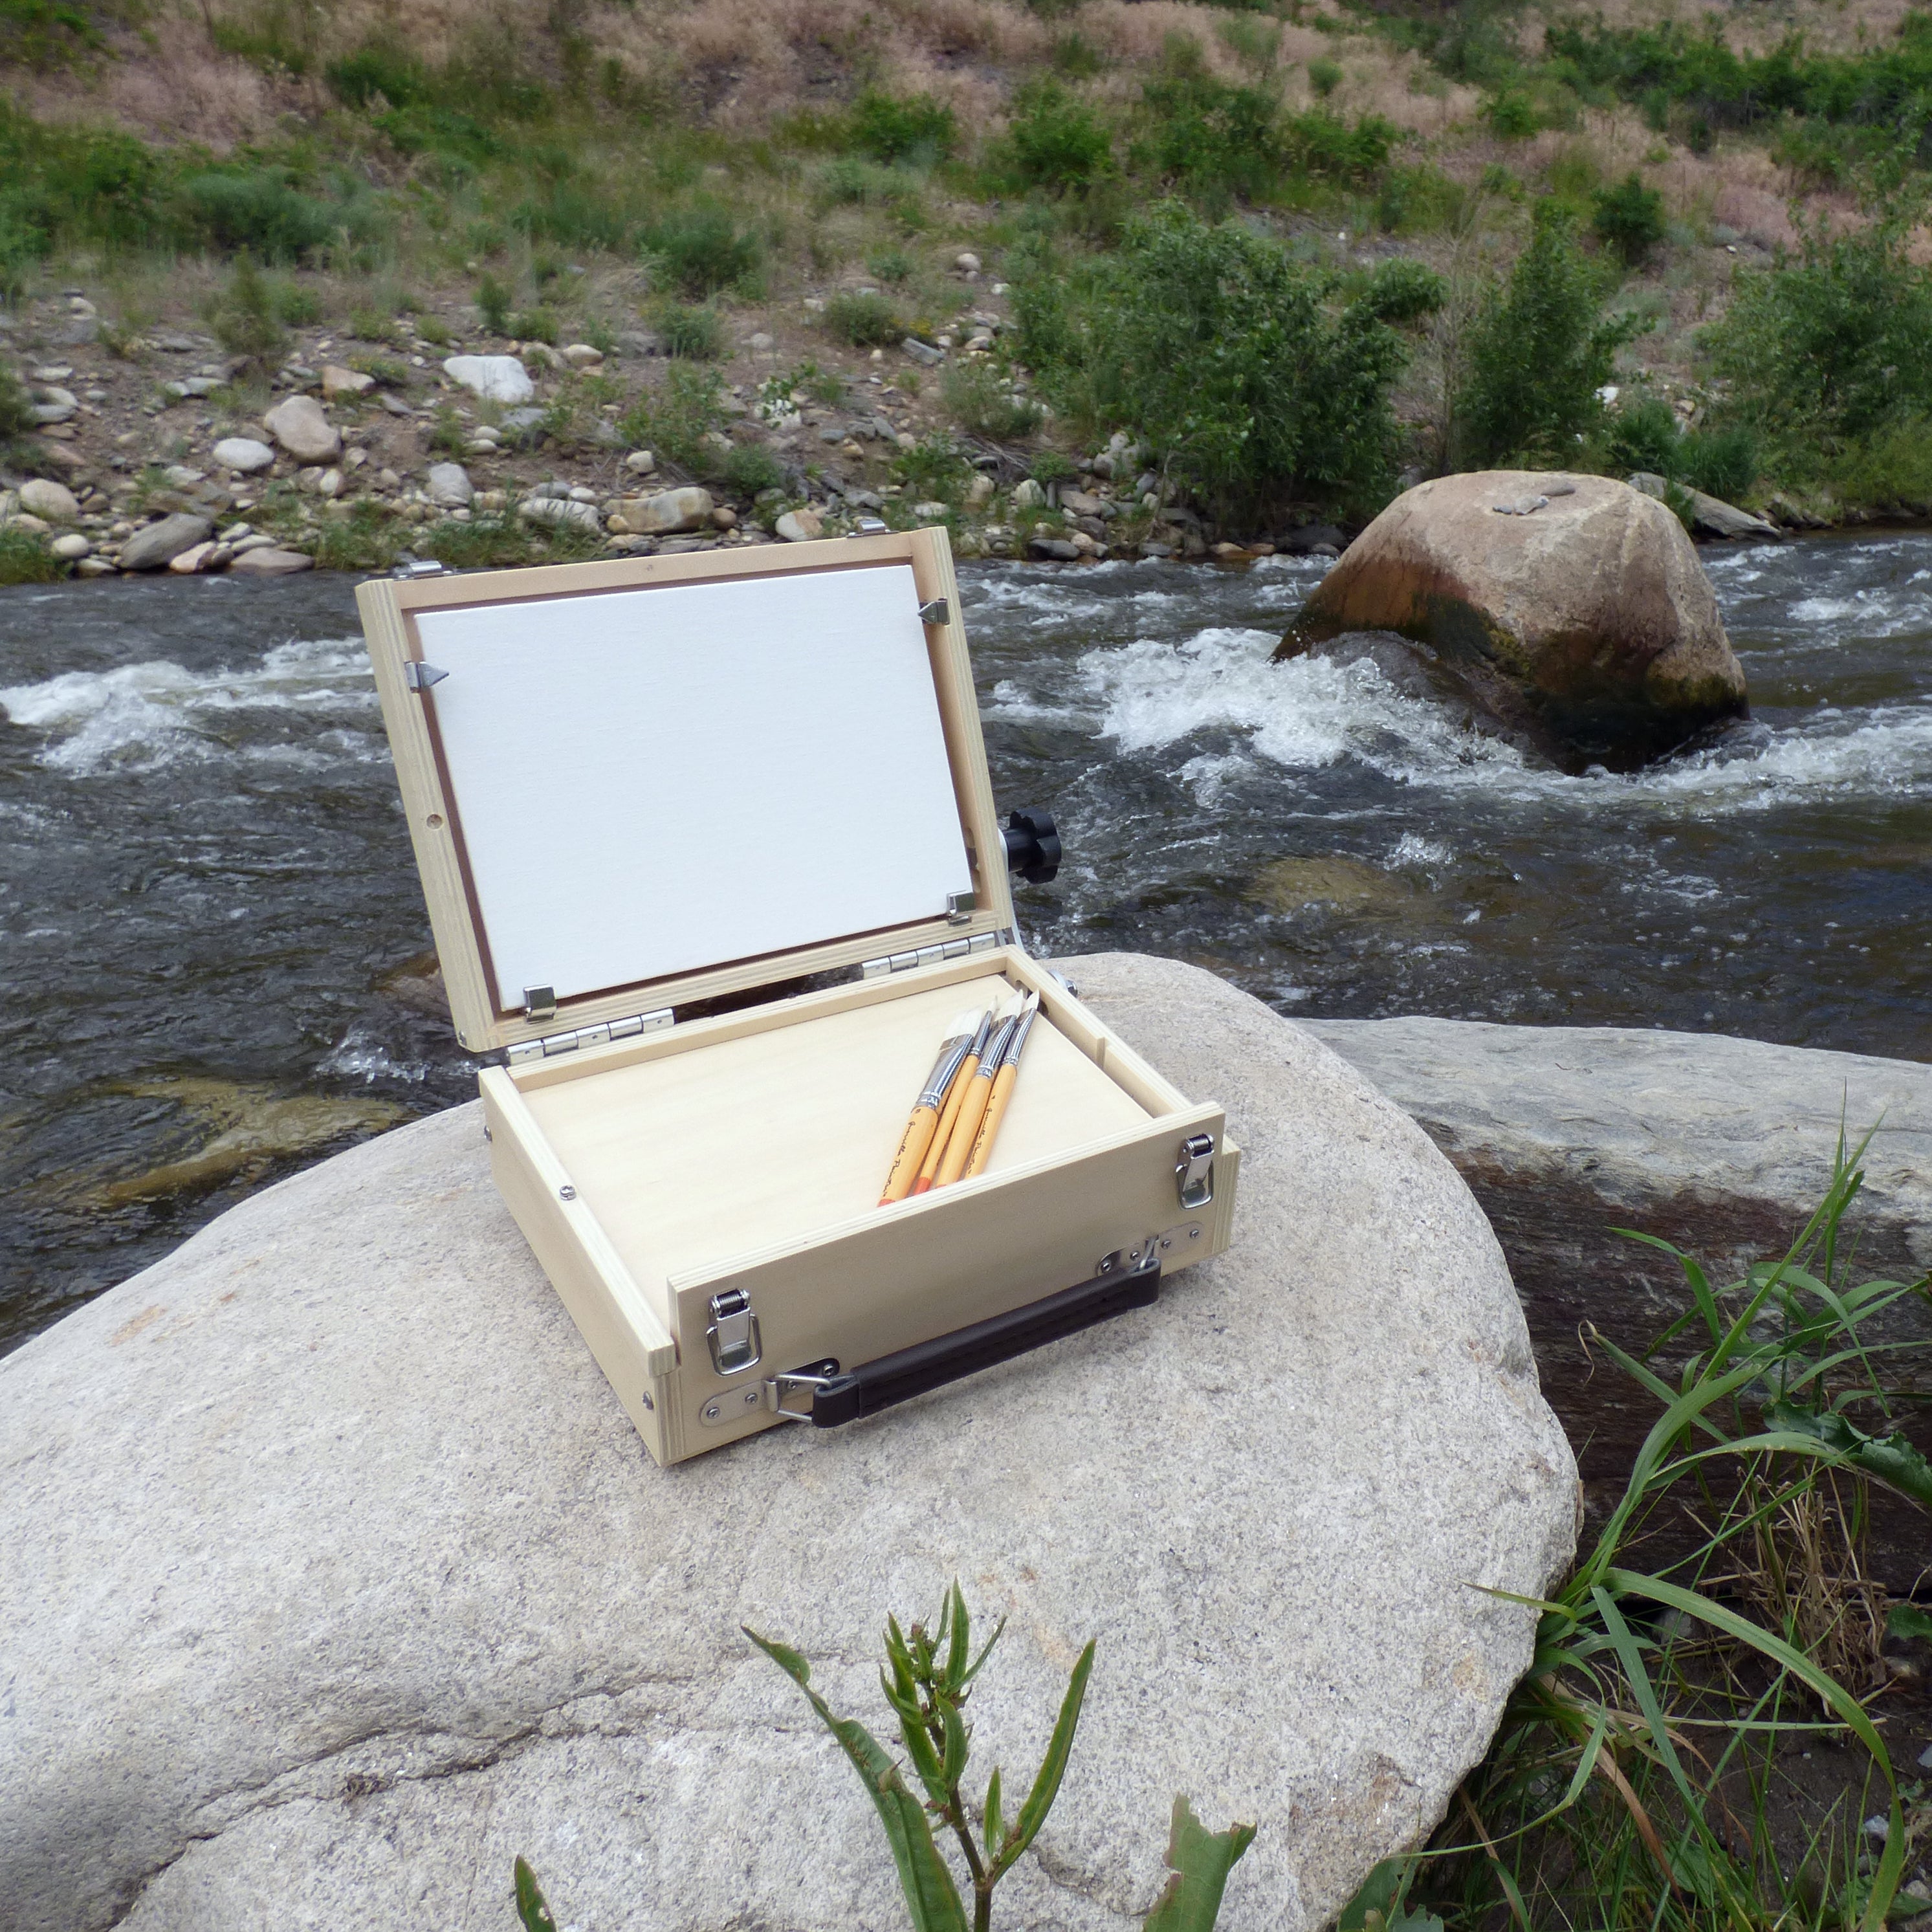 5x7 Slip-In Easel™ for the Pocket Box™ – Guerrilla Painter